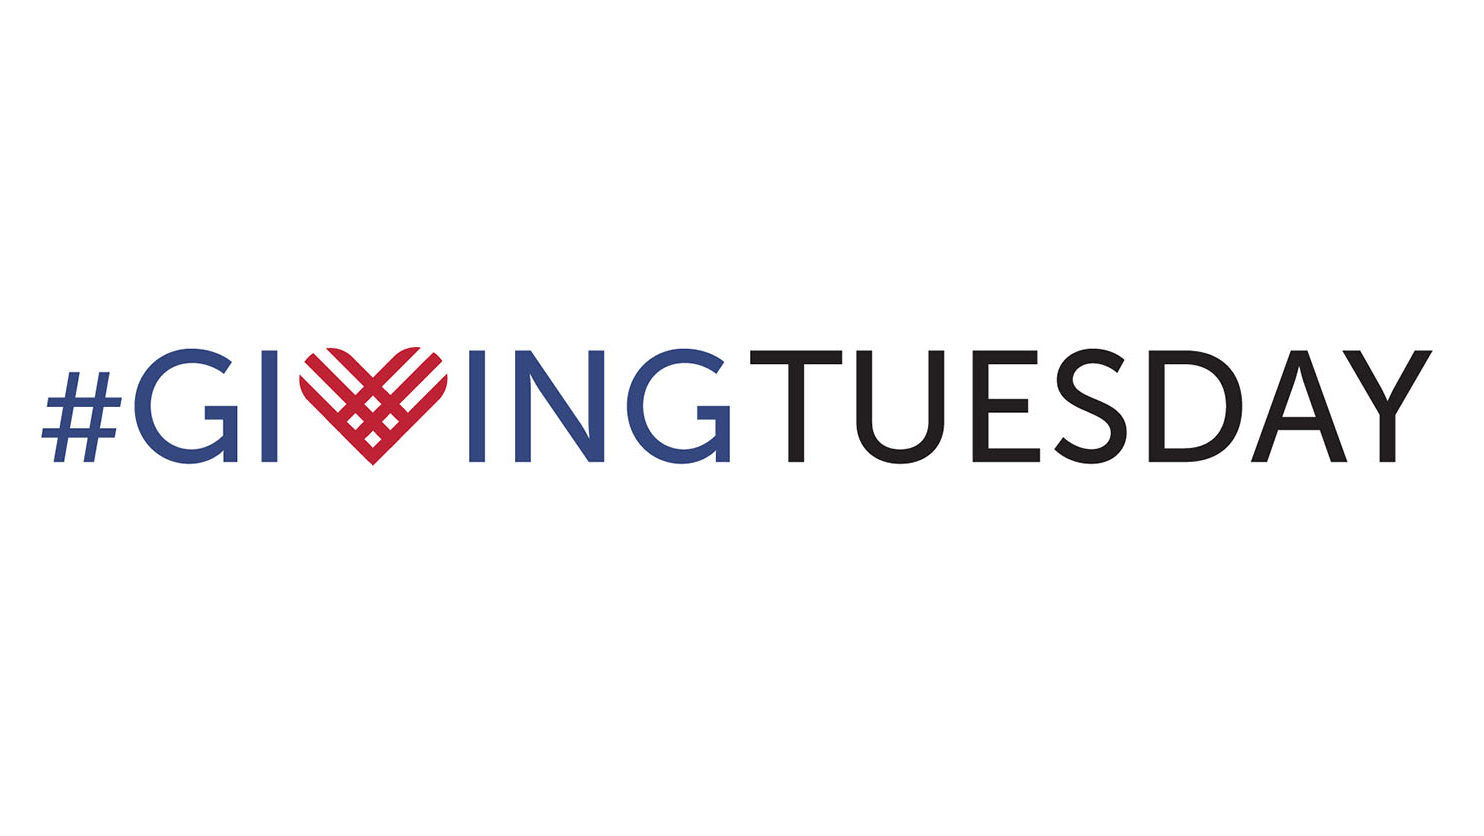 What Is The Giving Tuesday Font